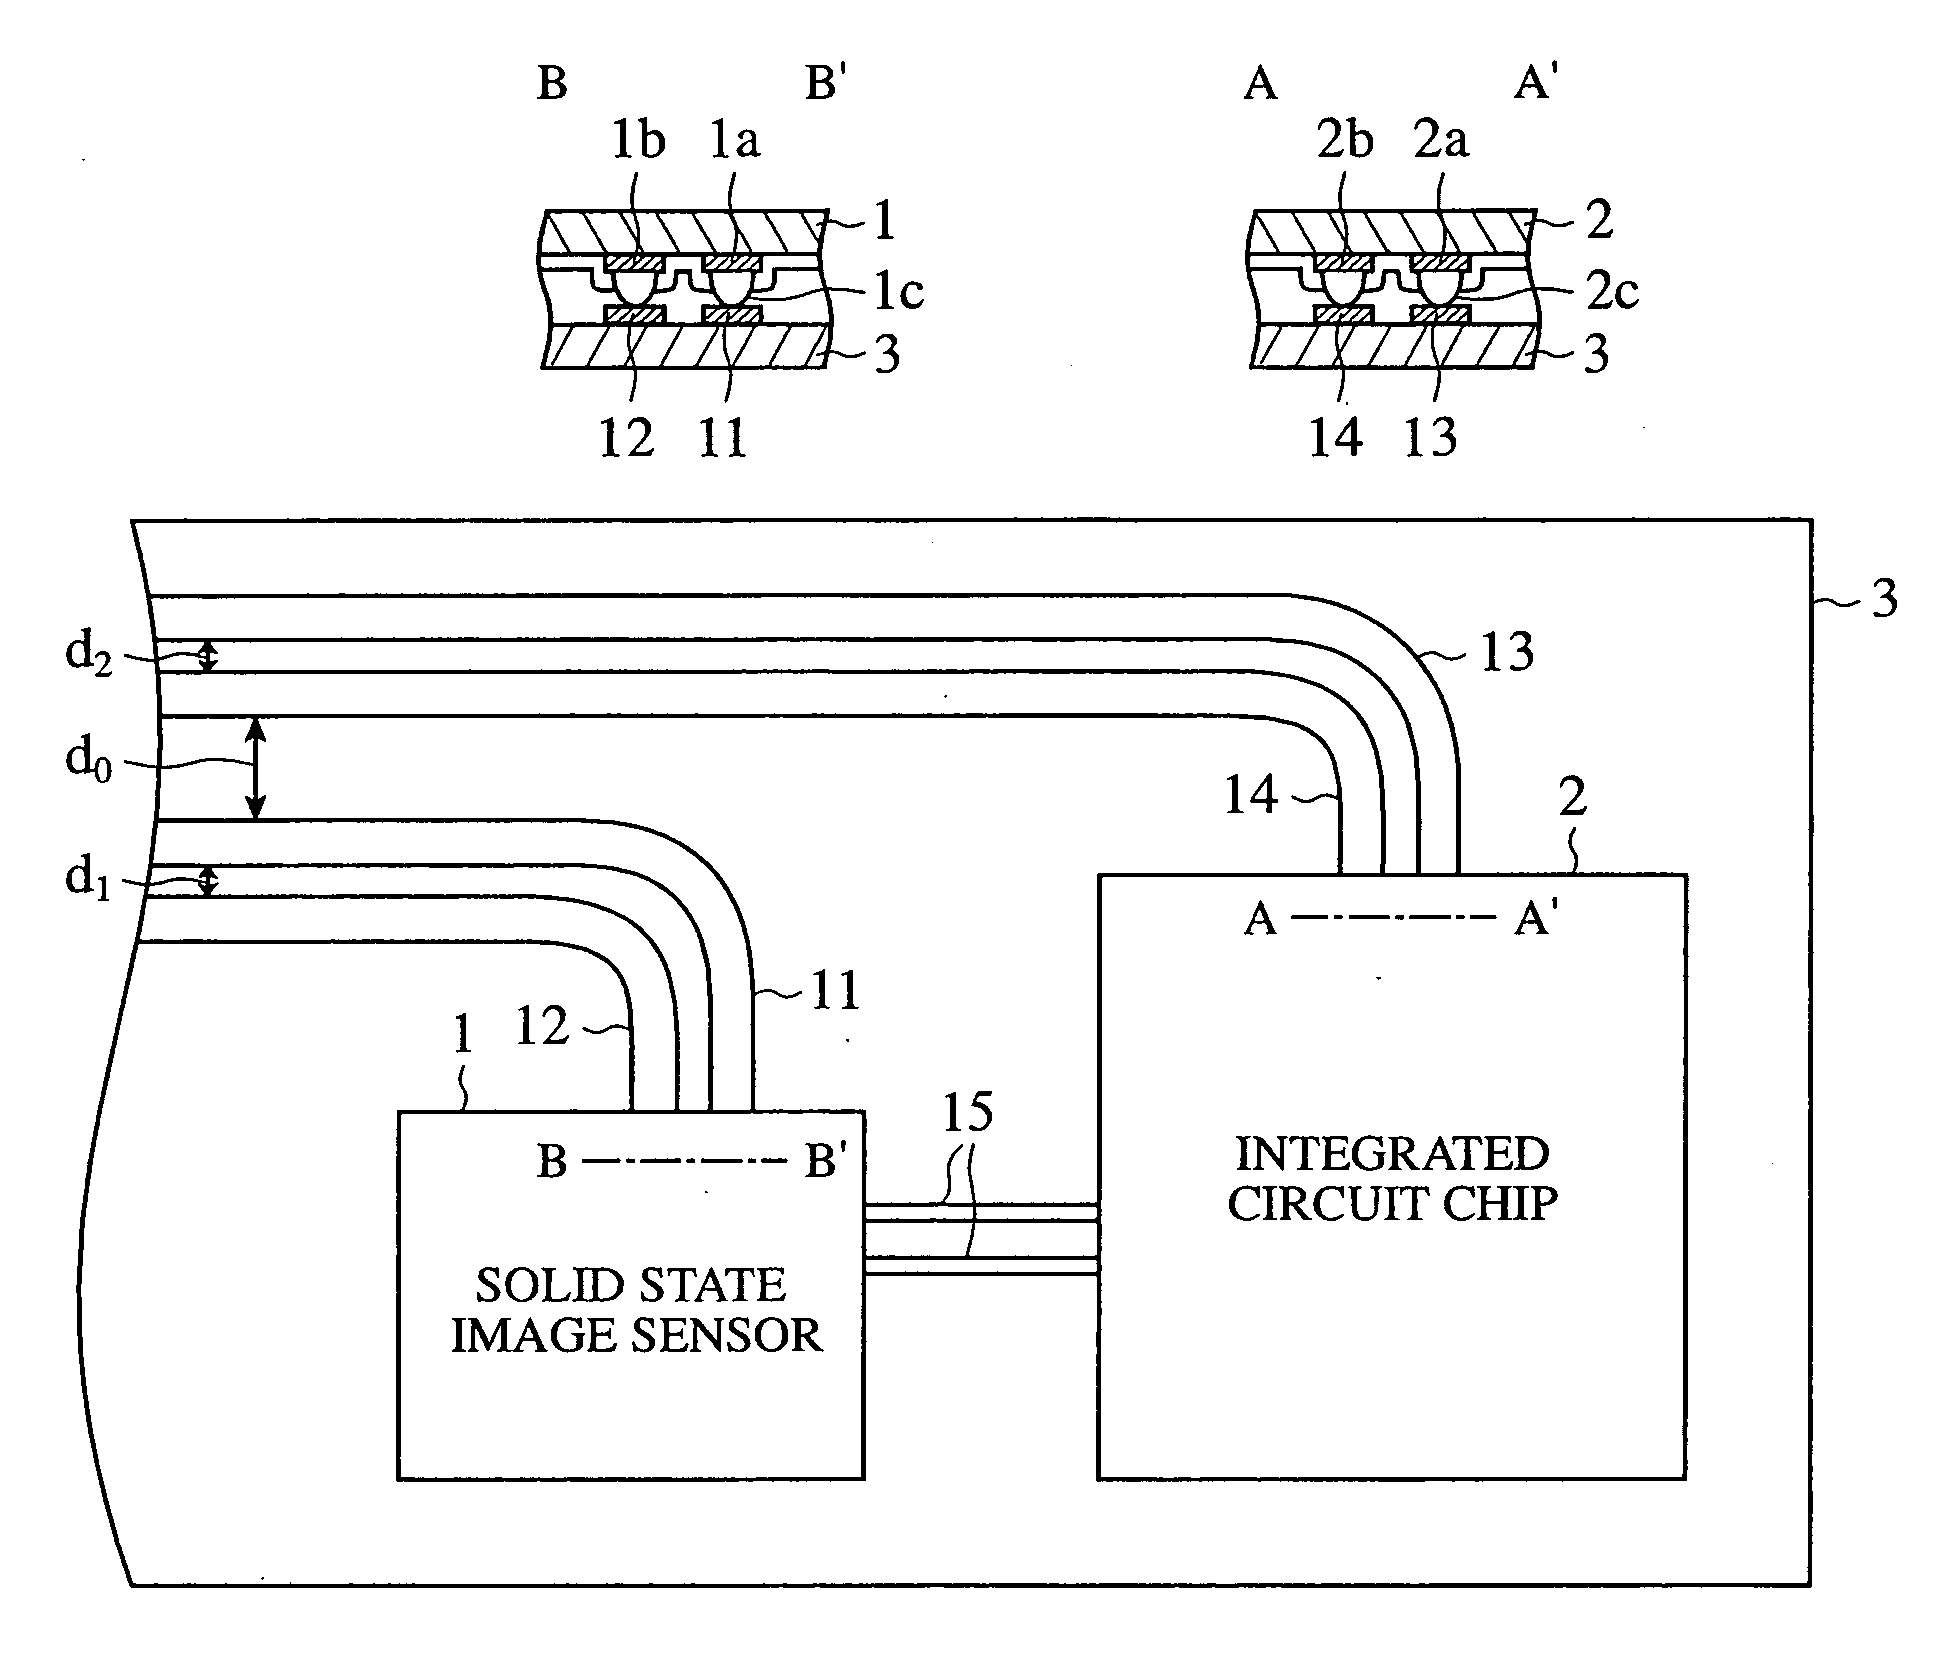 Solid state image sensing device